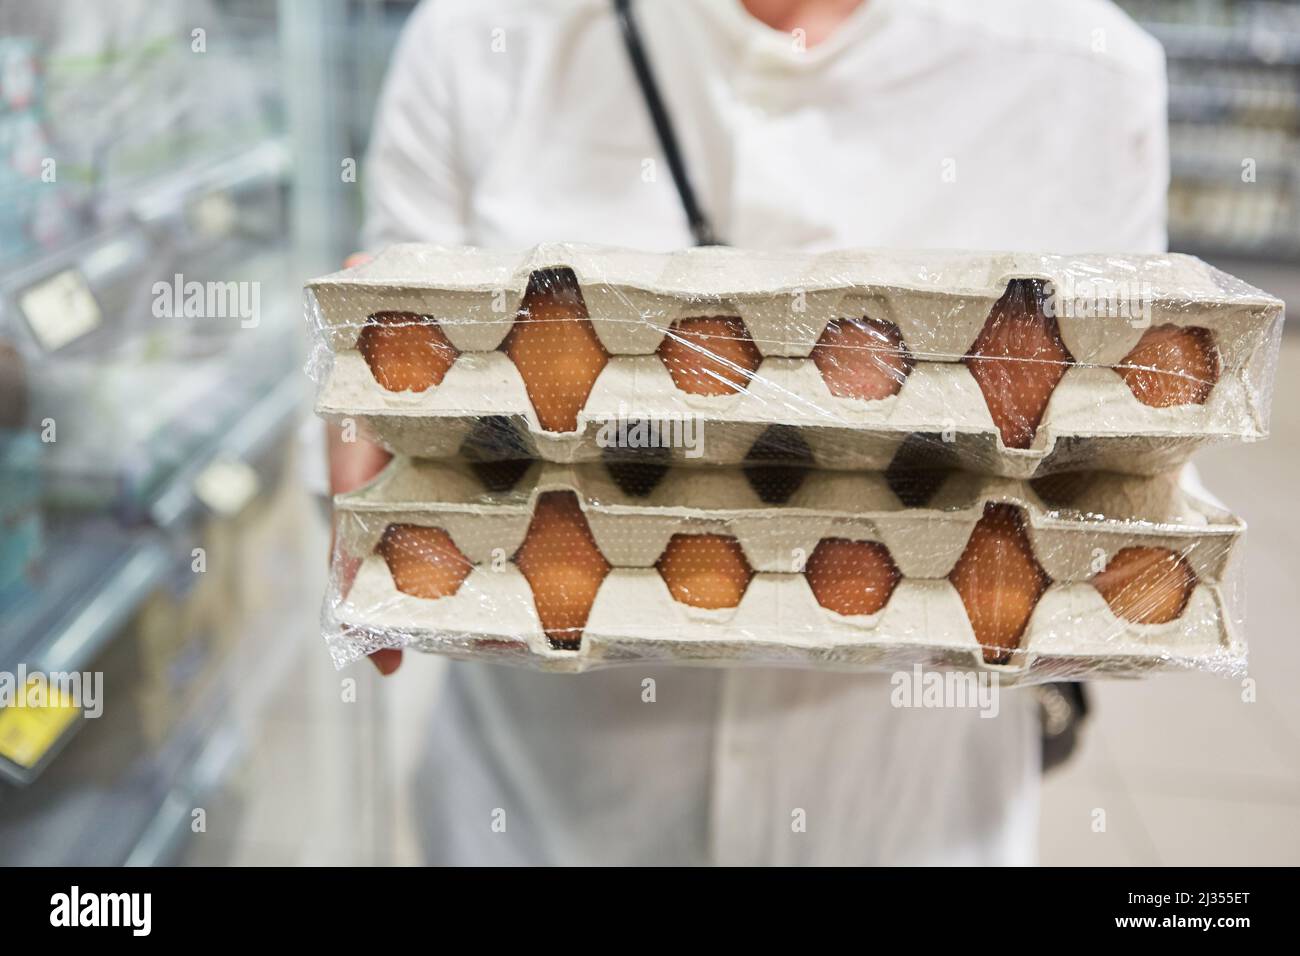 Customer carries stack of organic egg cartons while shopping in supermarket Stock Photo